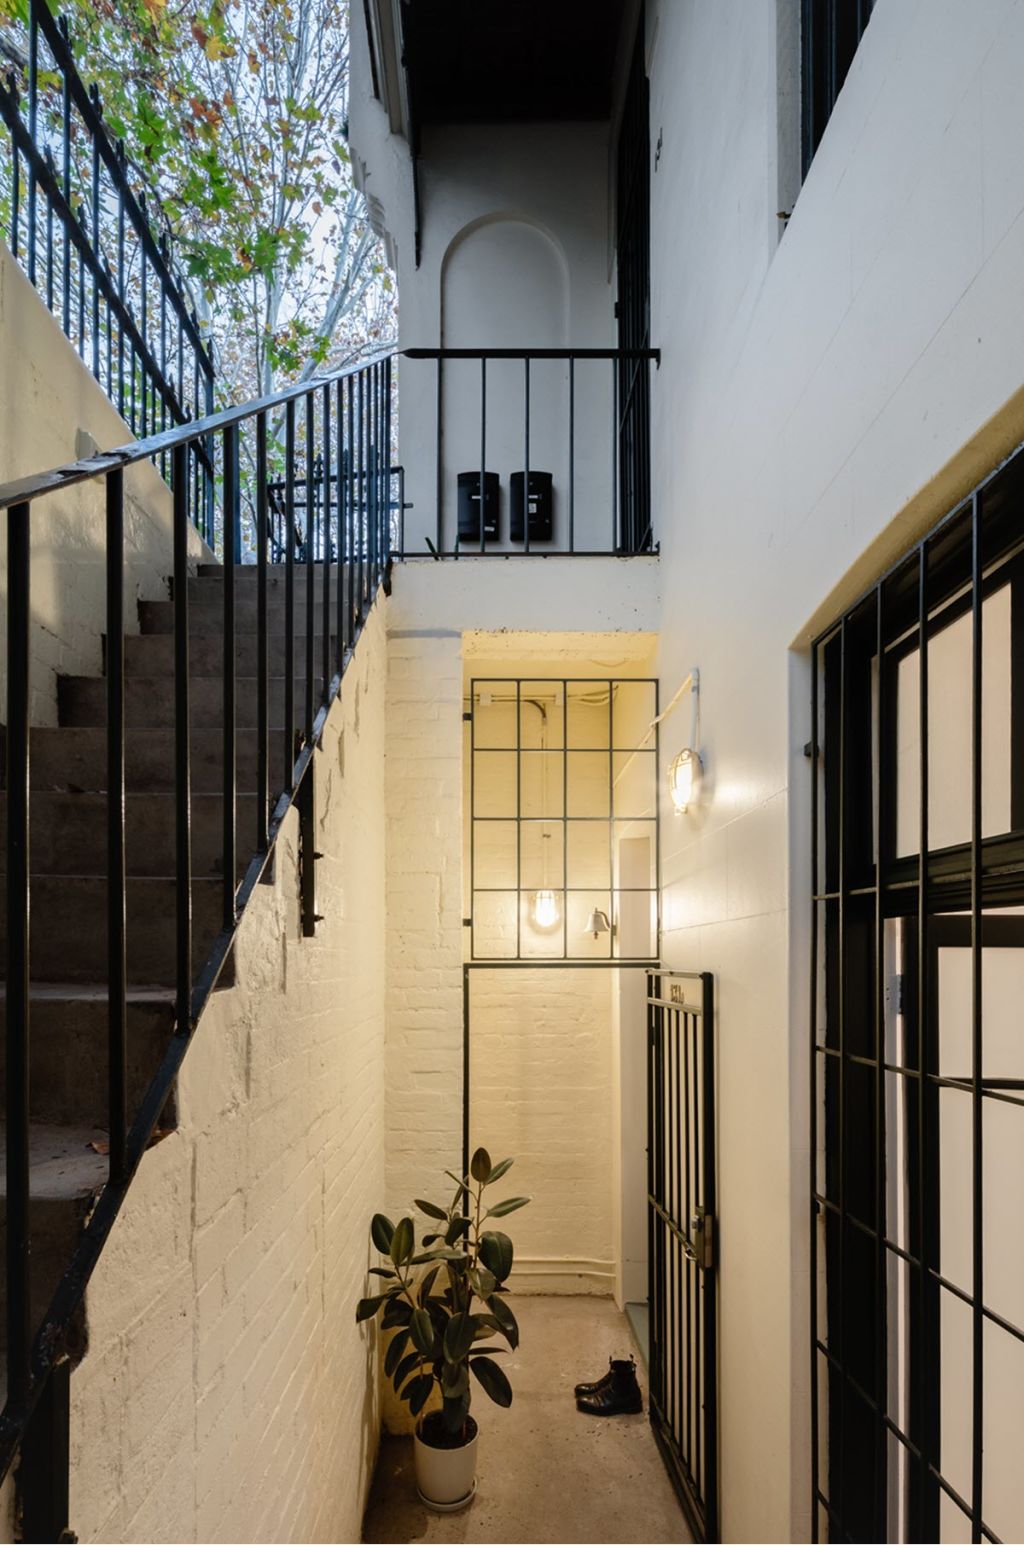 The entry to the apartment is below ground level. Photo: Katherine Lu